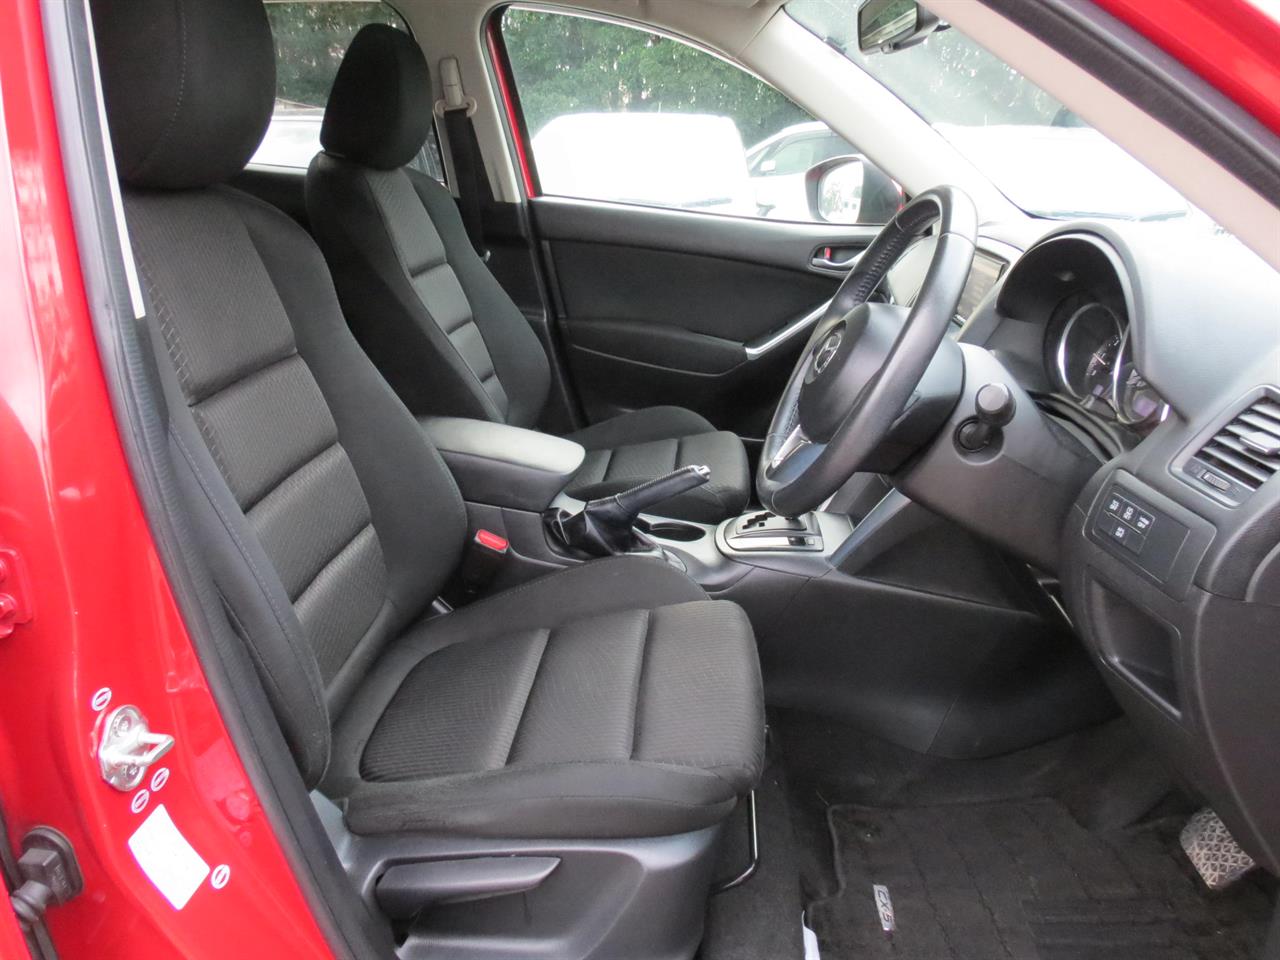 2012 Mazda CX-5 only $61 weekly